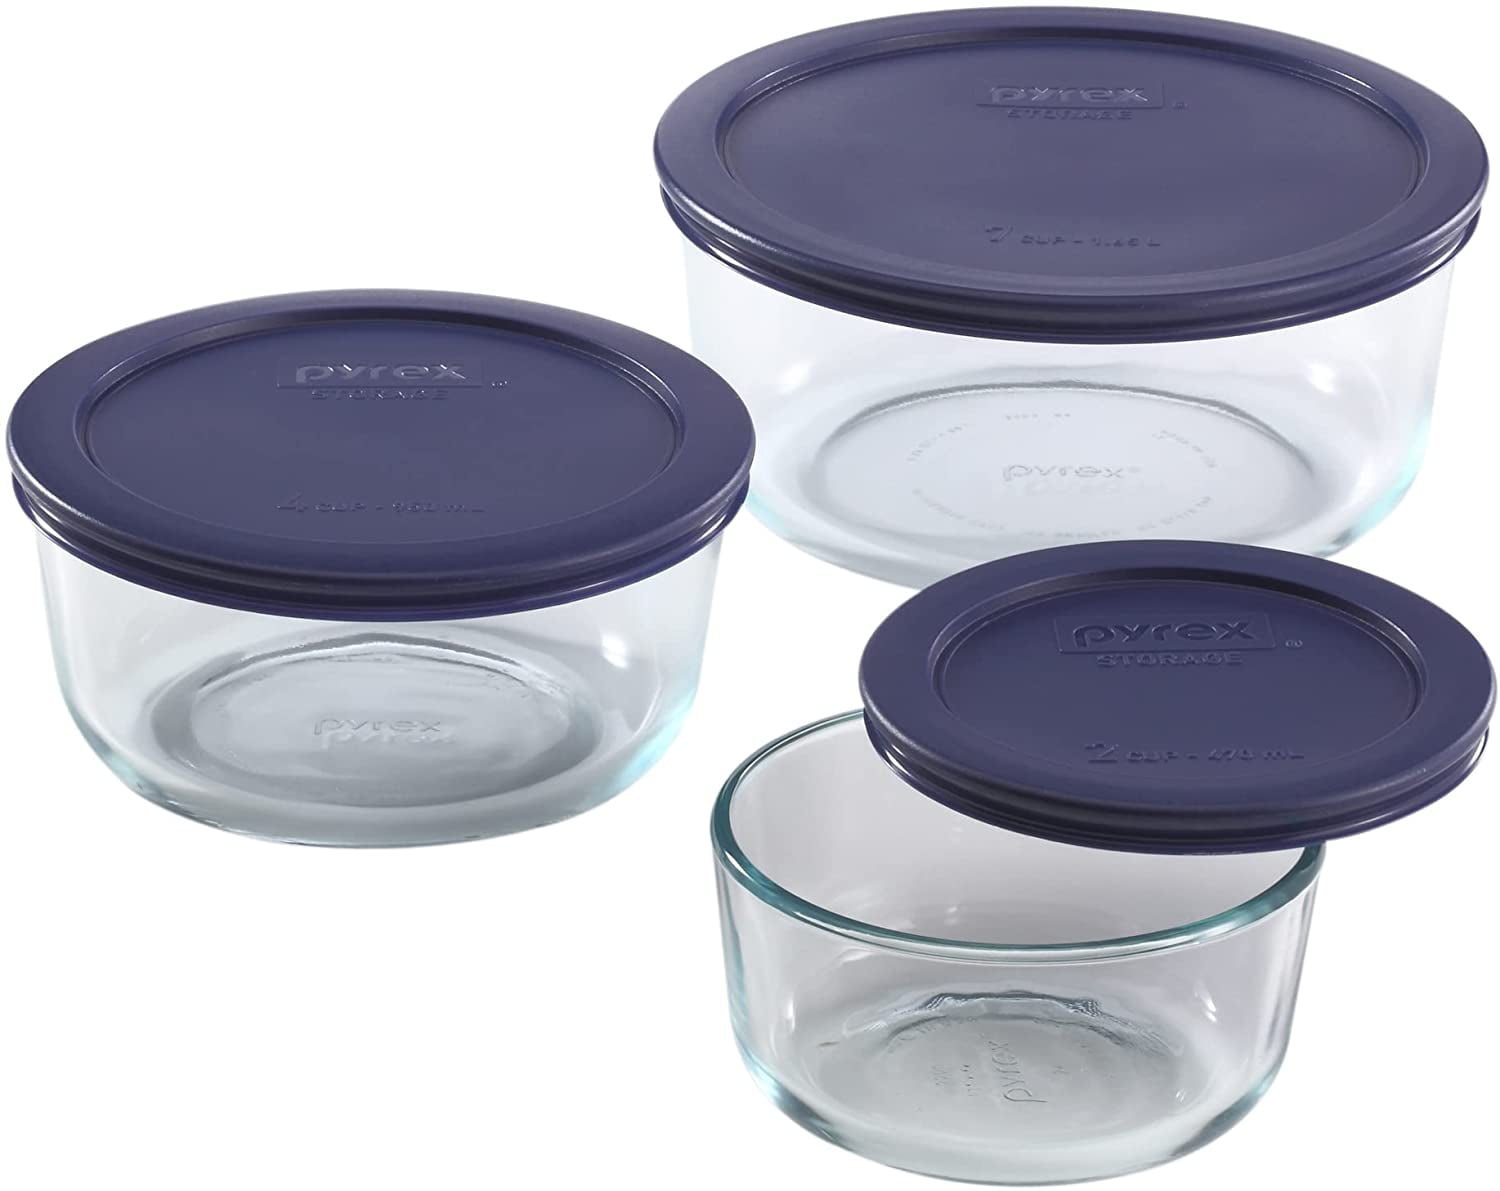 Pyrex Simply Store Glass Storage, 4 Cup, Utensils